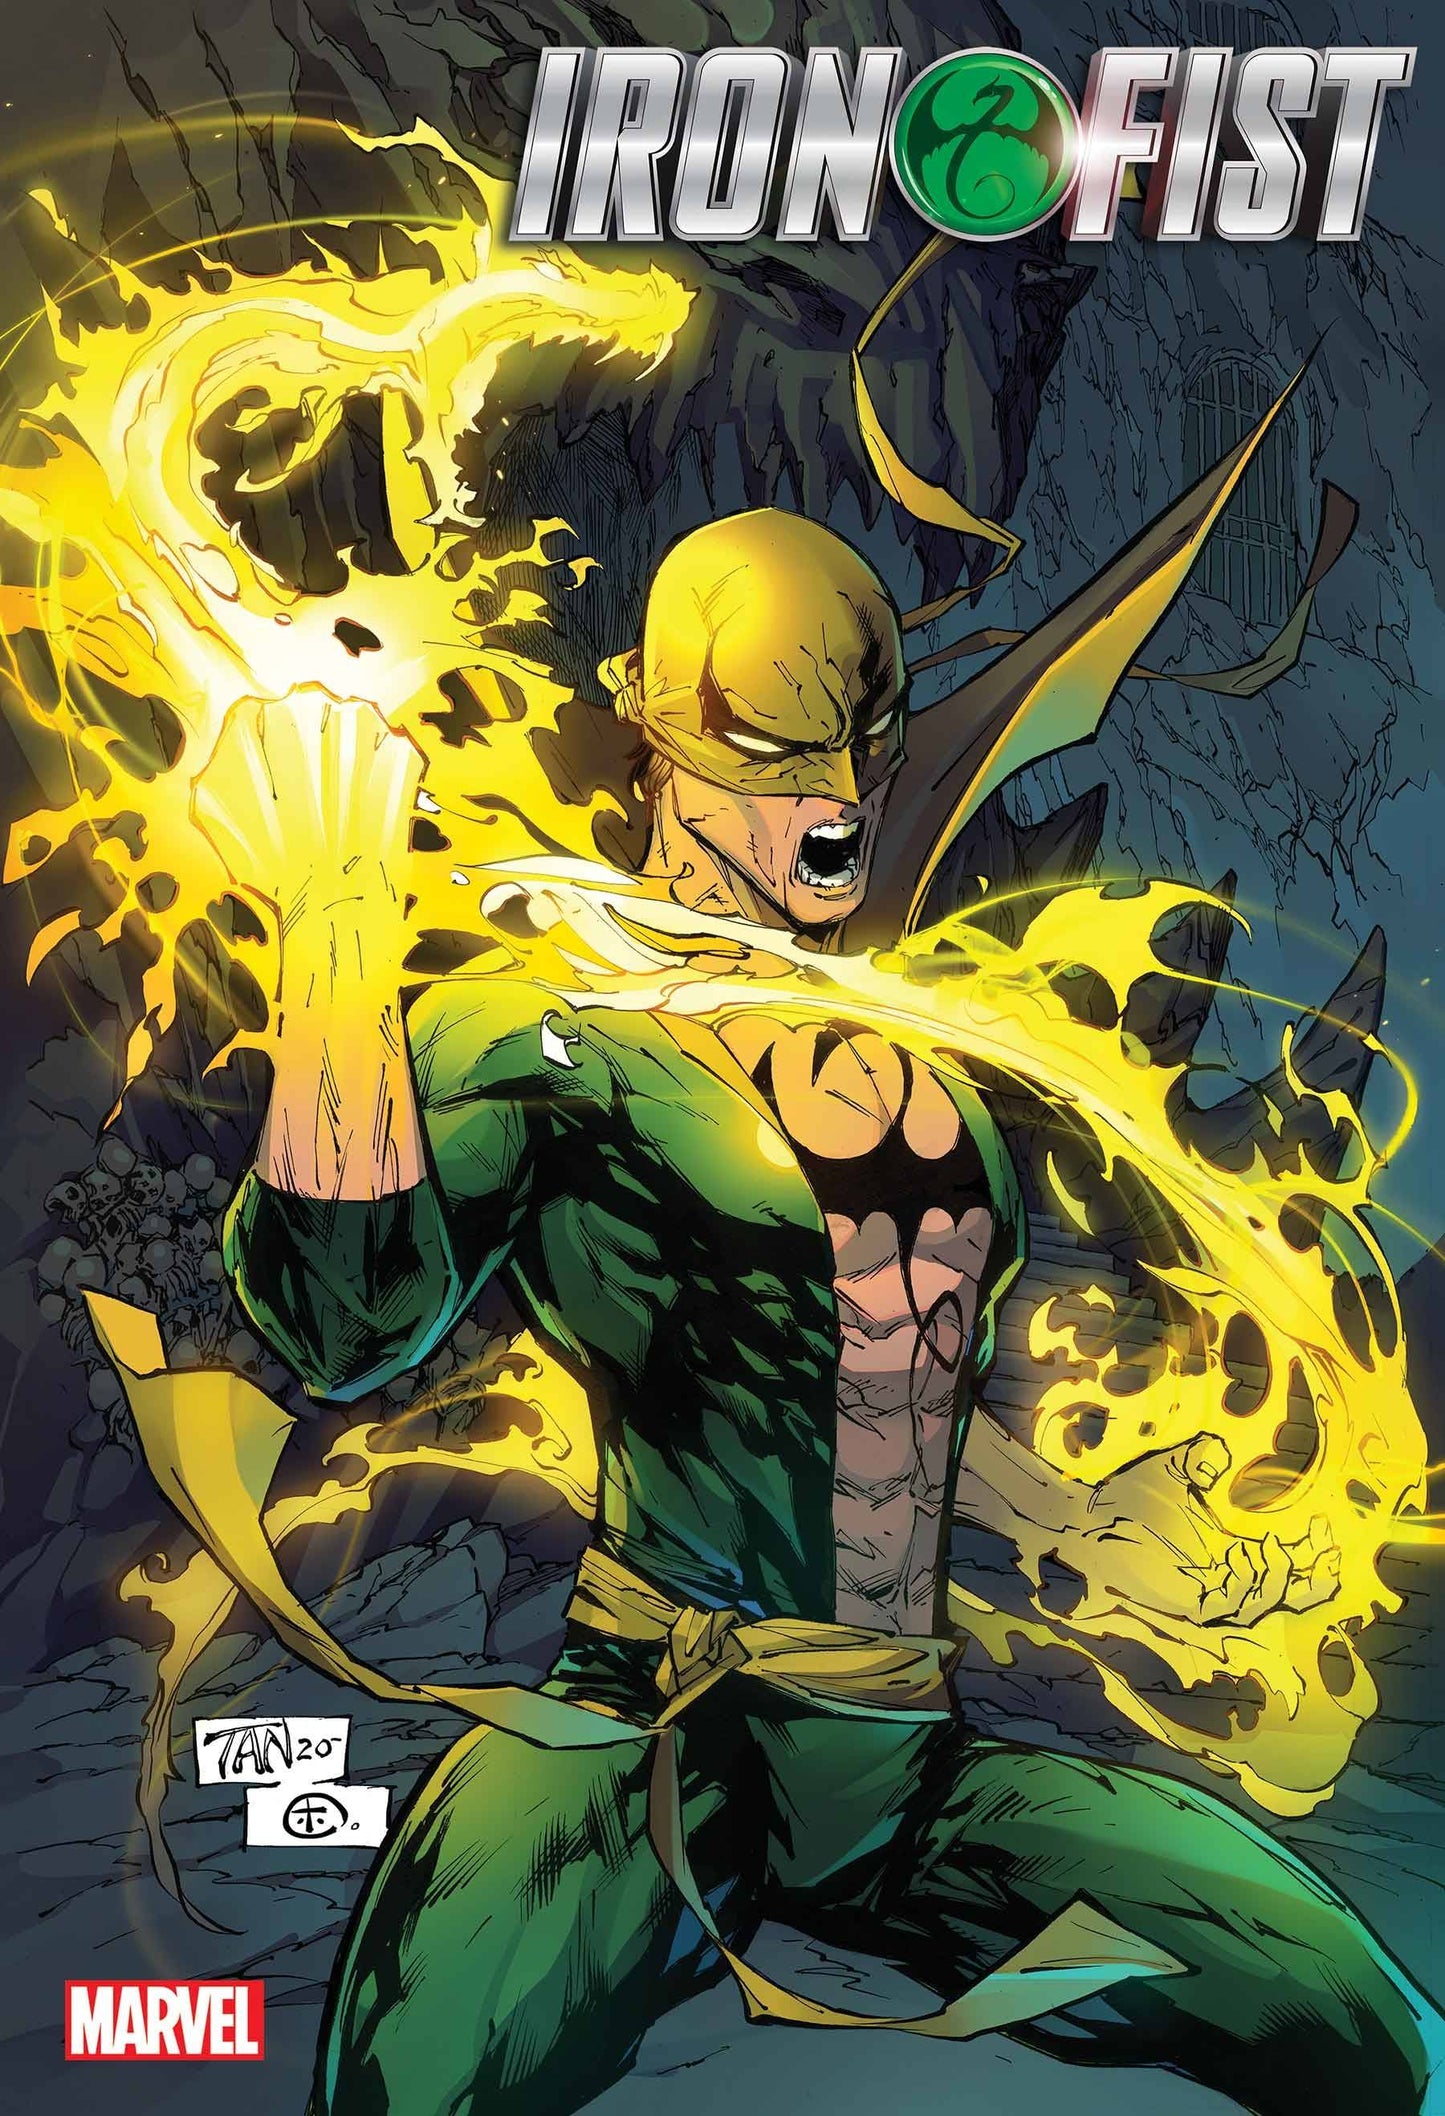 IRON FIST HEART OF DRAGON #1 POSTER